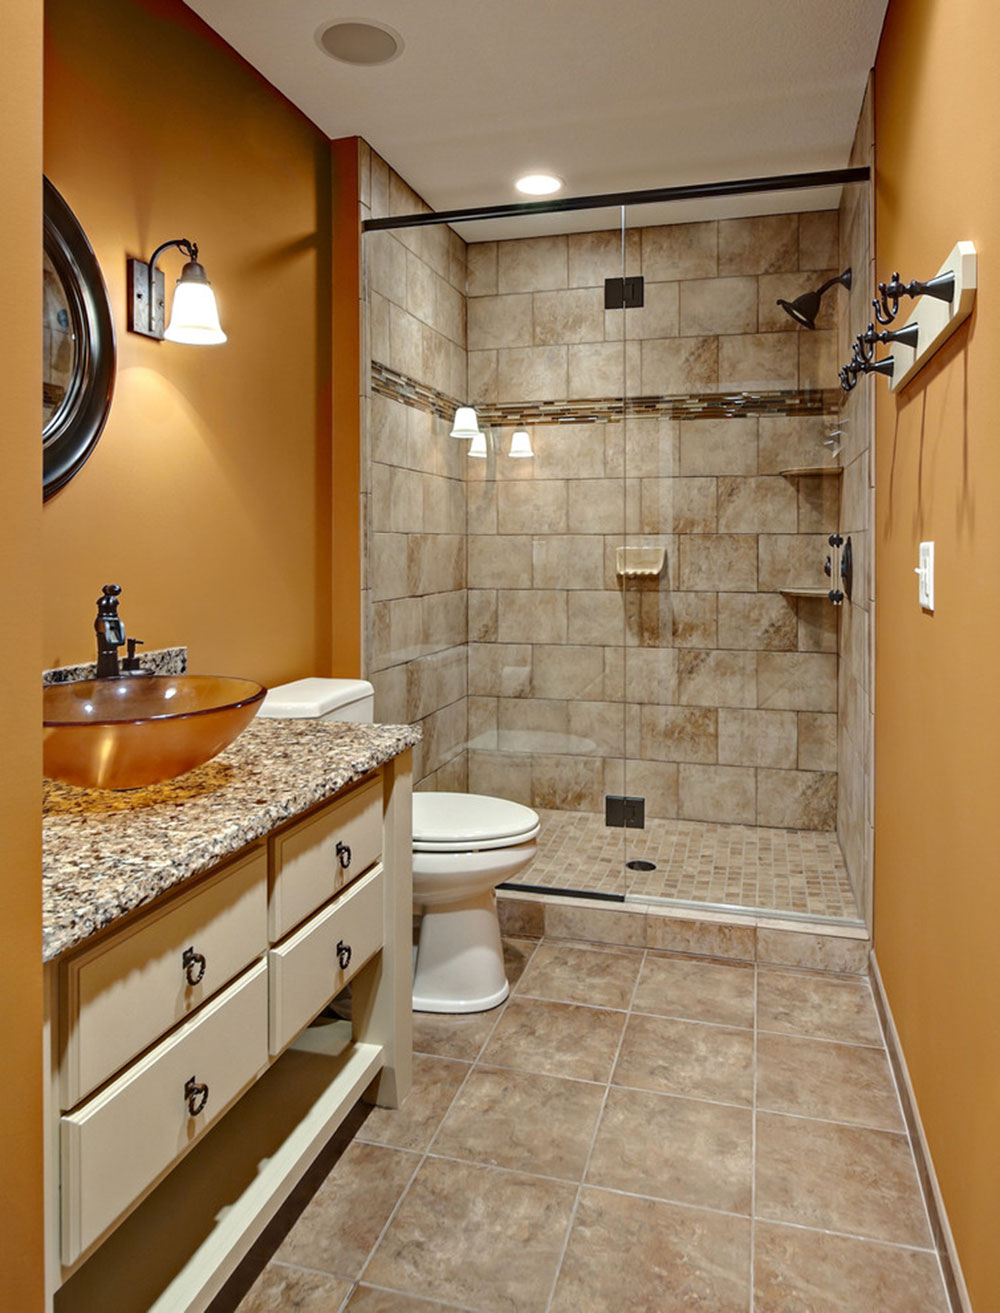 How Much Does It Cost To Add A Bathroom In The Basement Answered - Can You Put A Full Bathroom In Basement